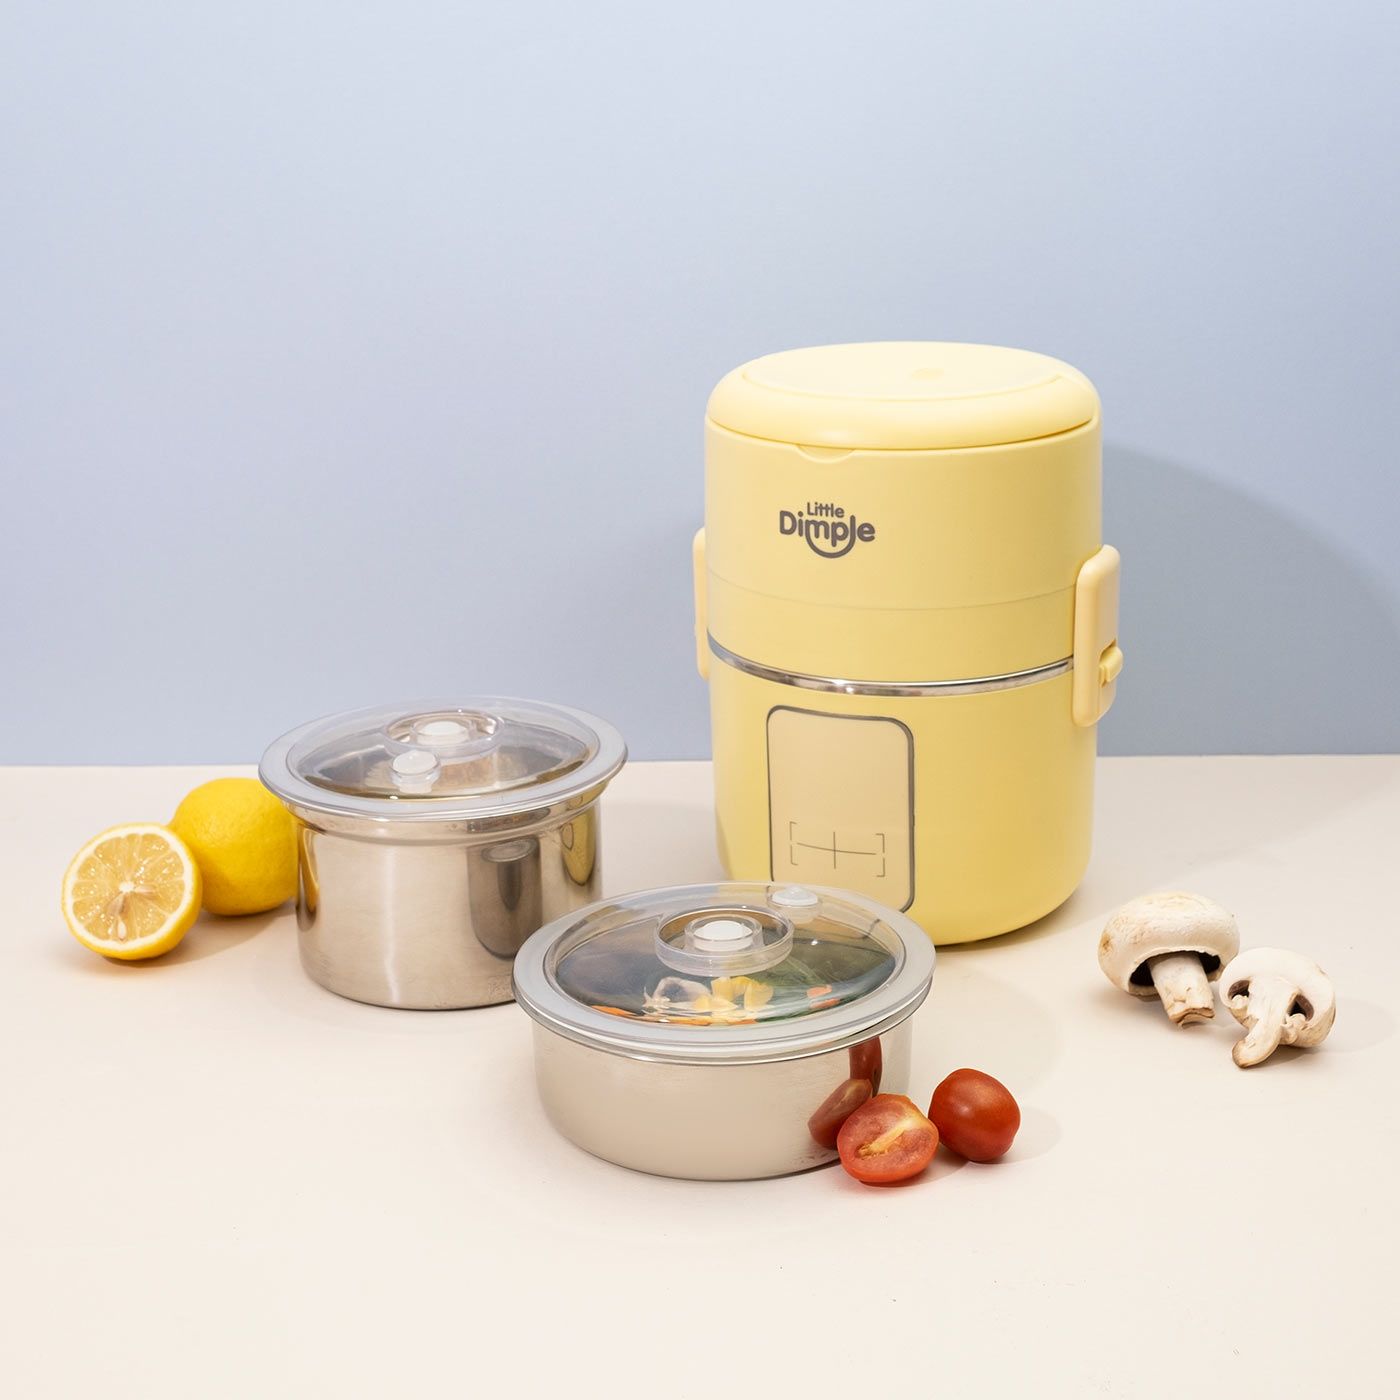 Little Dimple Portable Cooker Yellow - 6